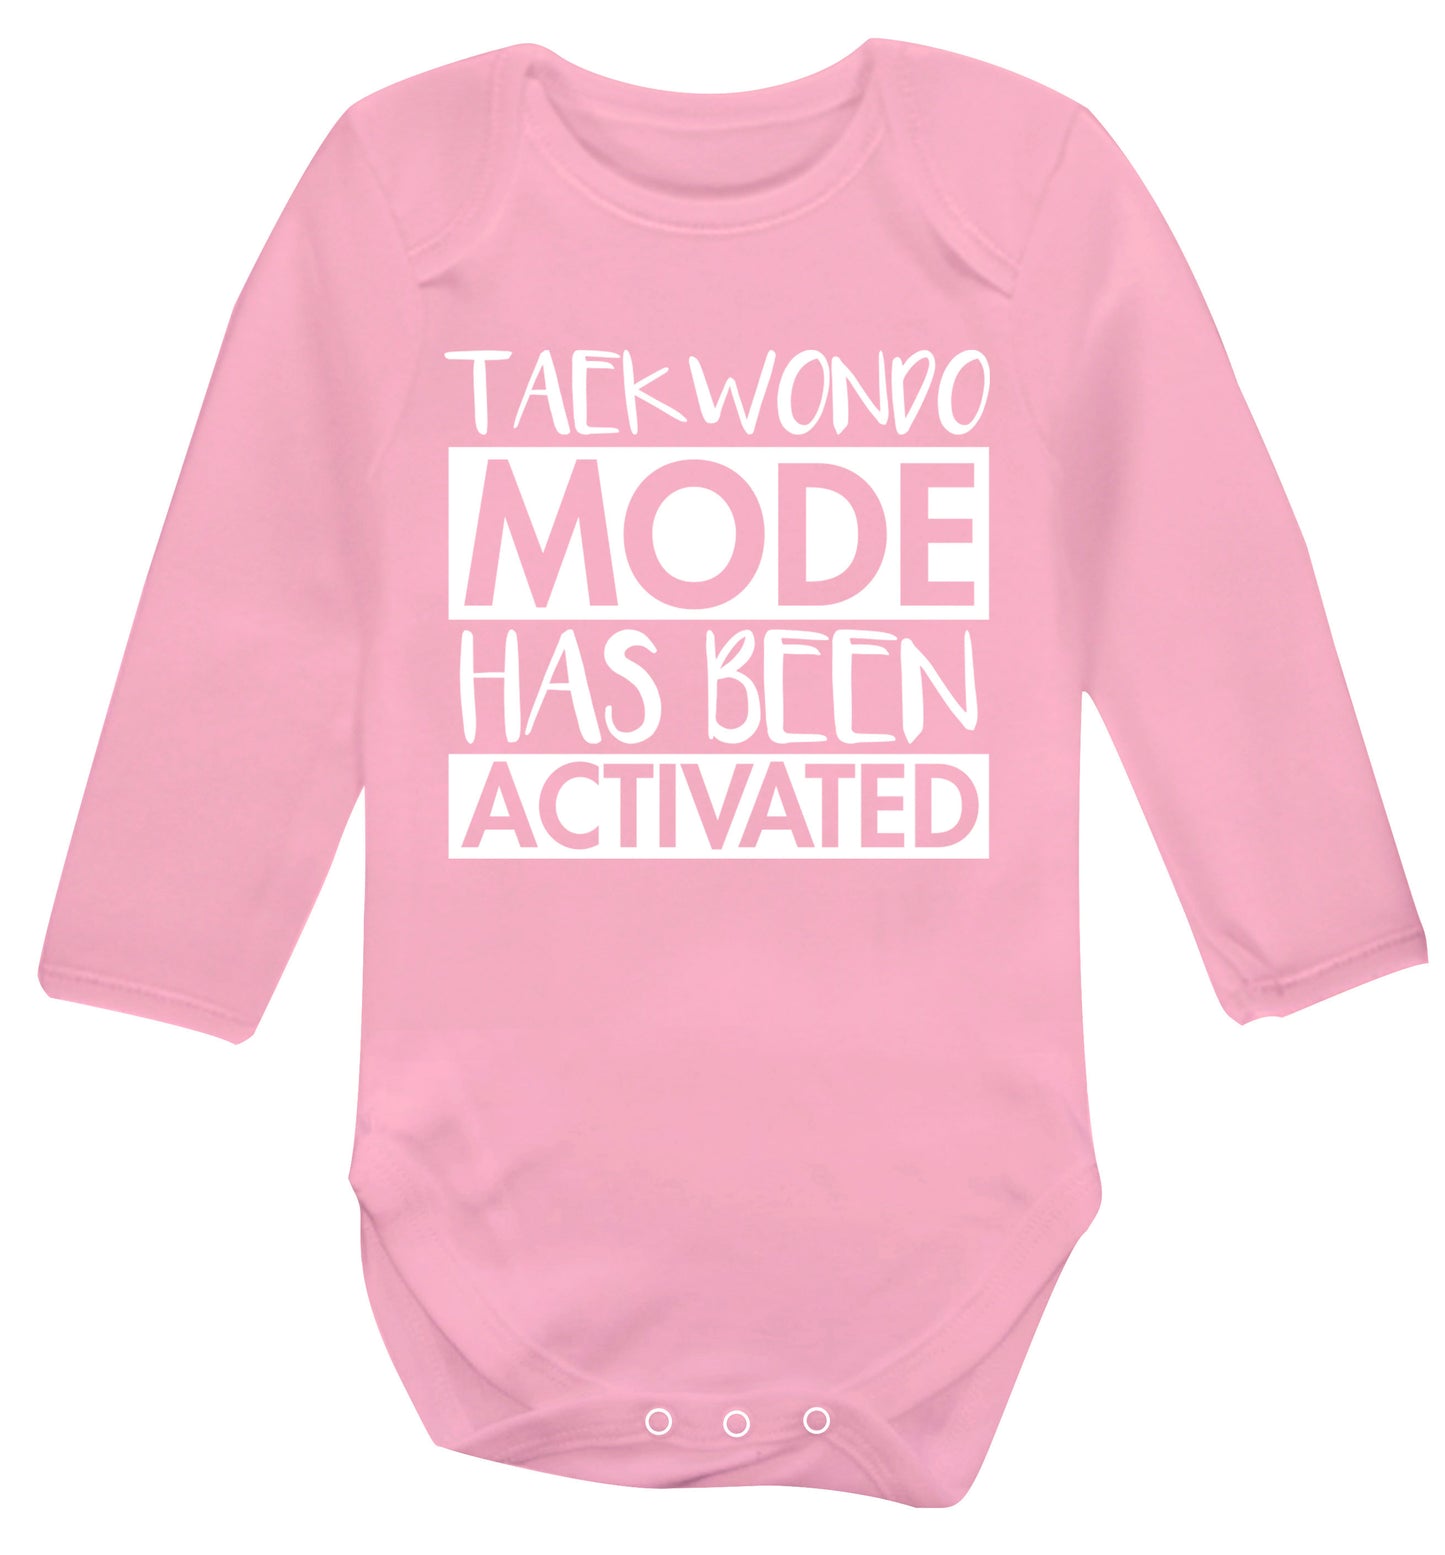 Taekwondo mode activated Baby Vest long sleeved pale pink 6-12 months